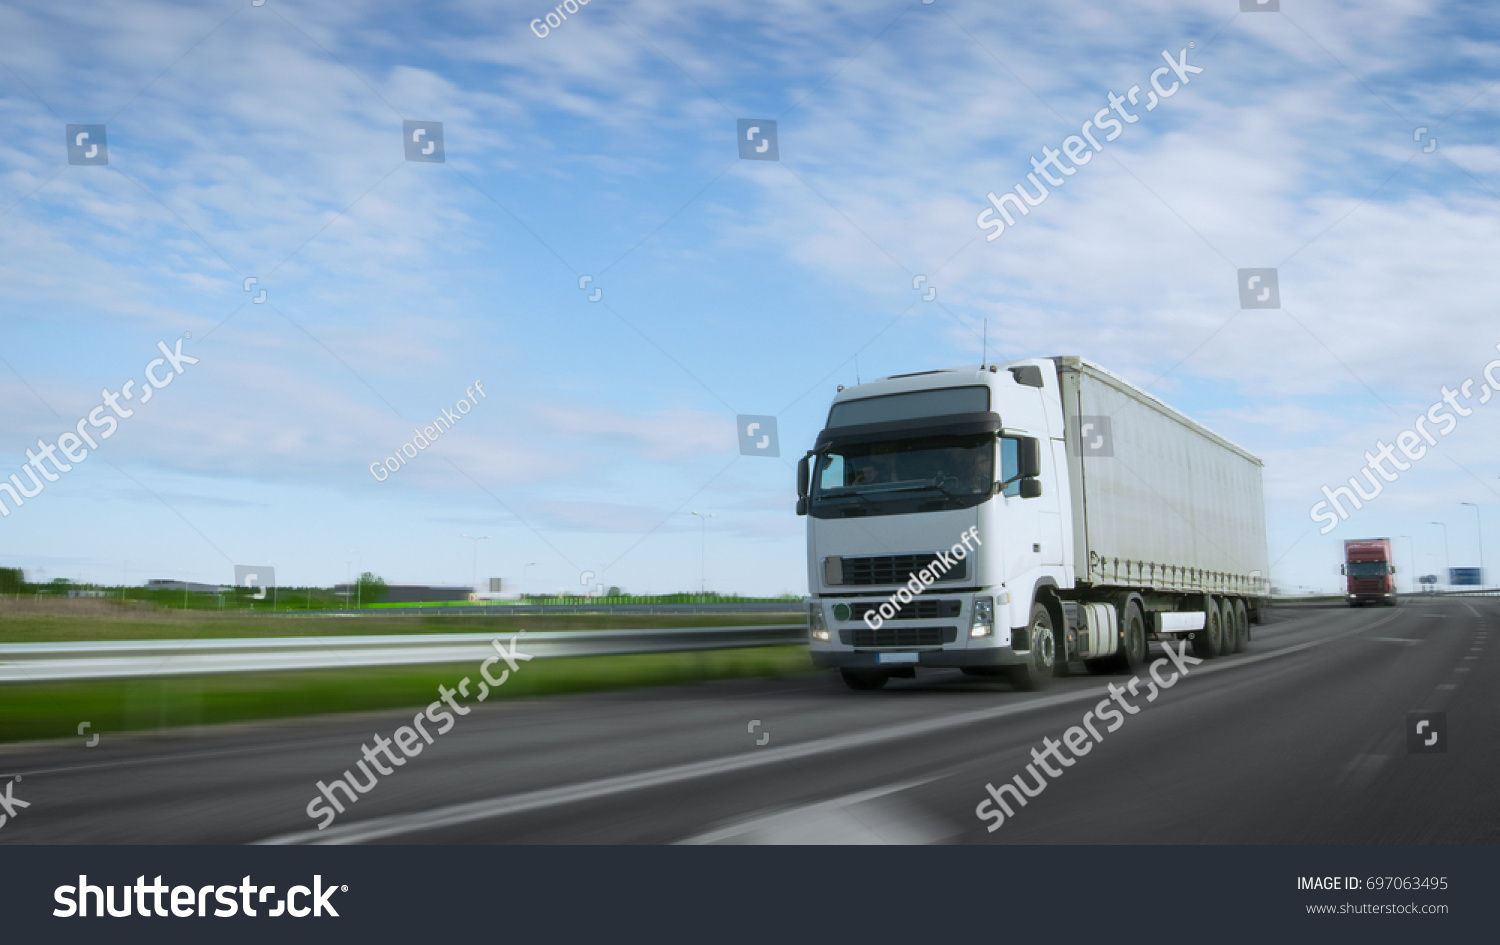 Speeding White Semi Truck with Cargo Trailer Drives on the Highway. Truck is First in the Column of Heavy Vehicles, Sun is Shining. Blur motion. #697063495